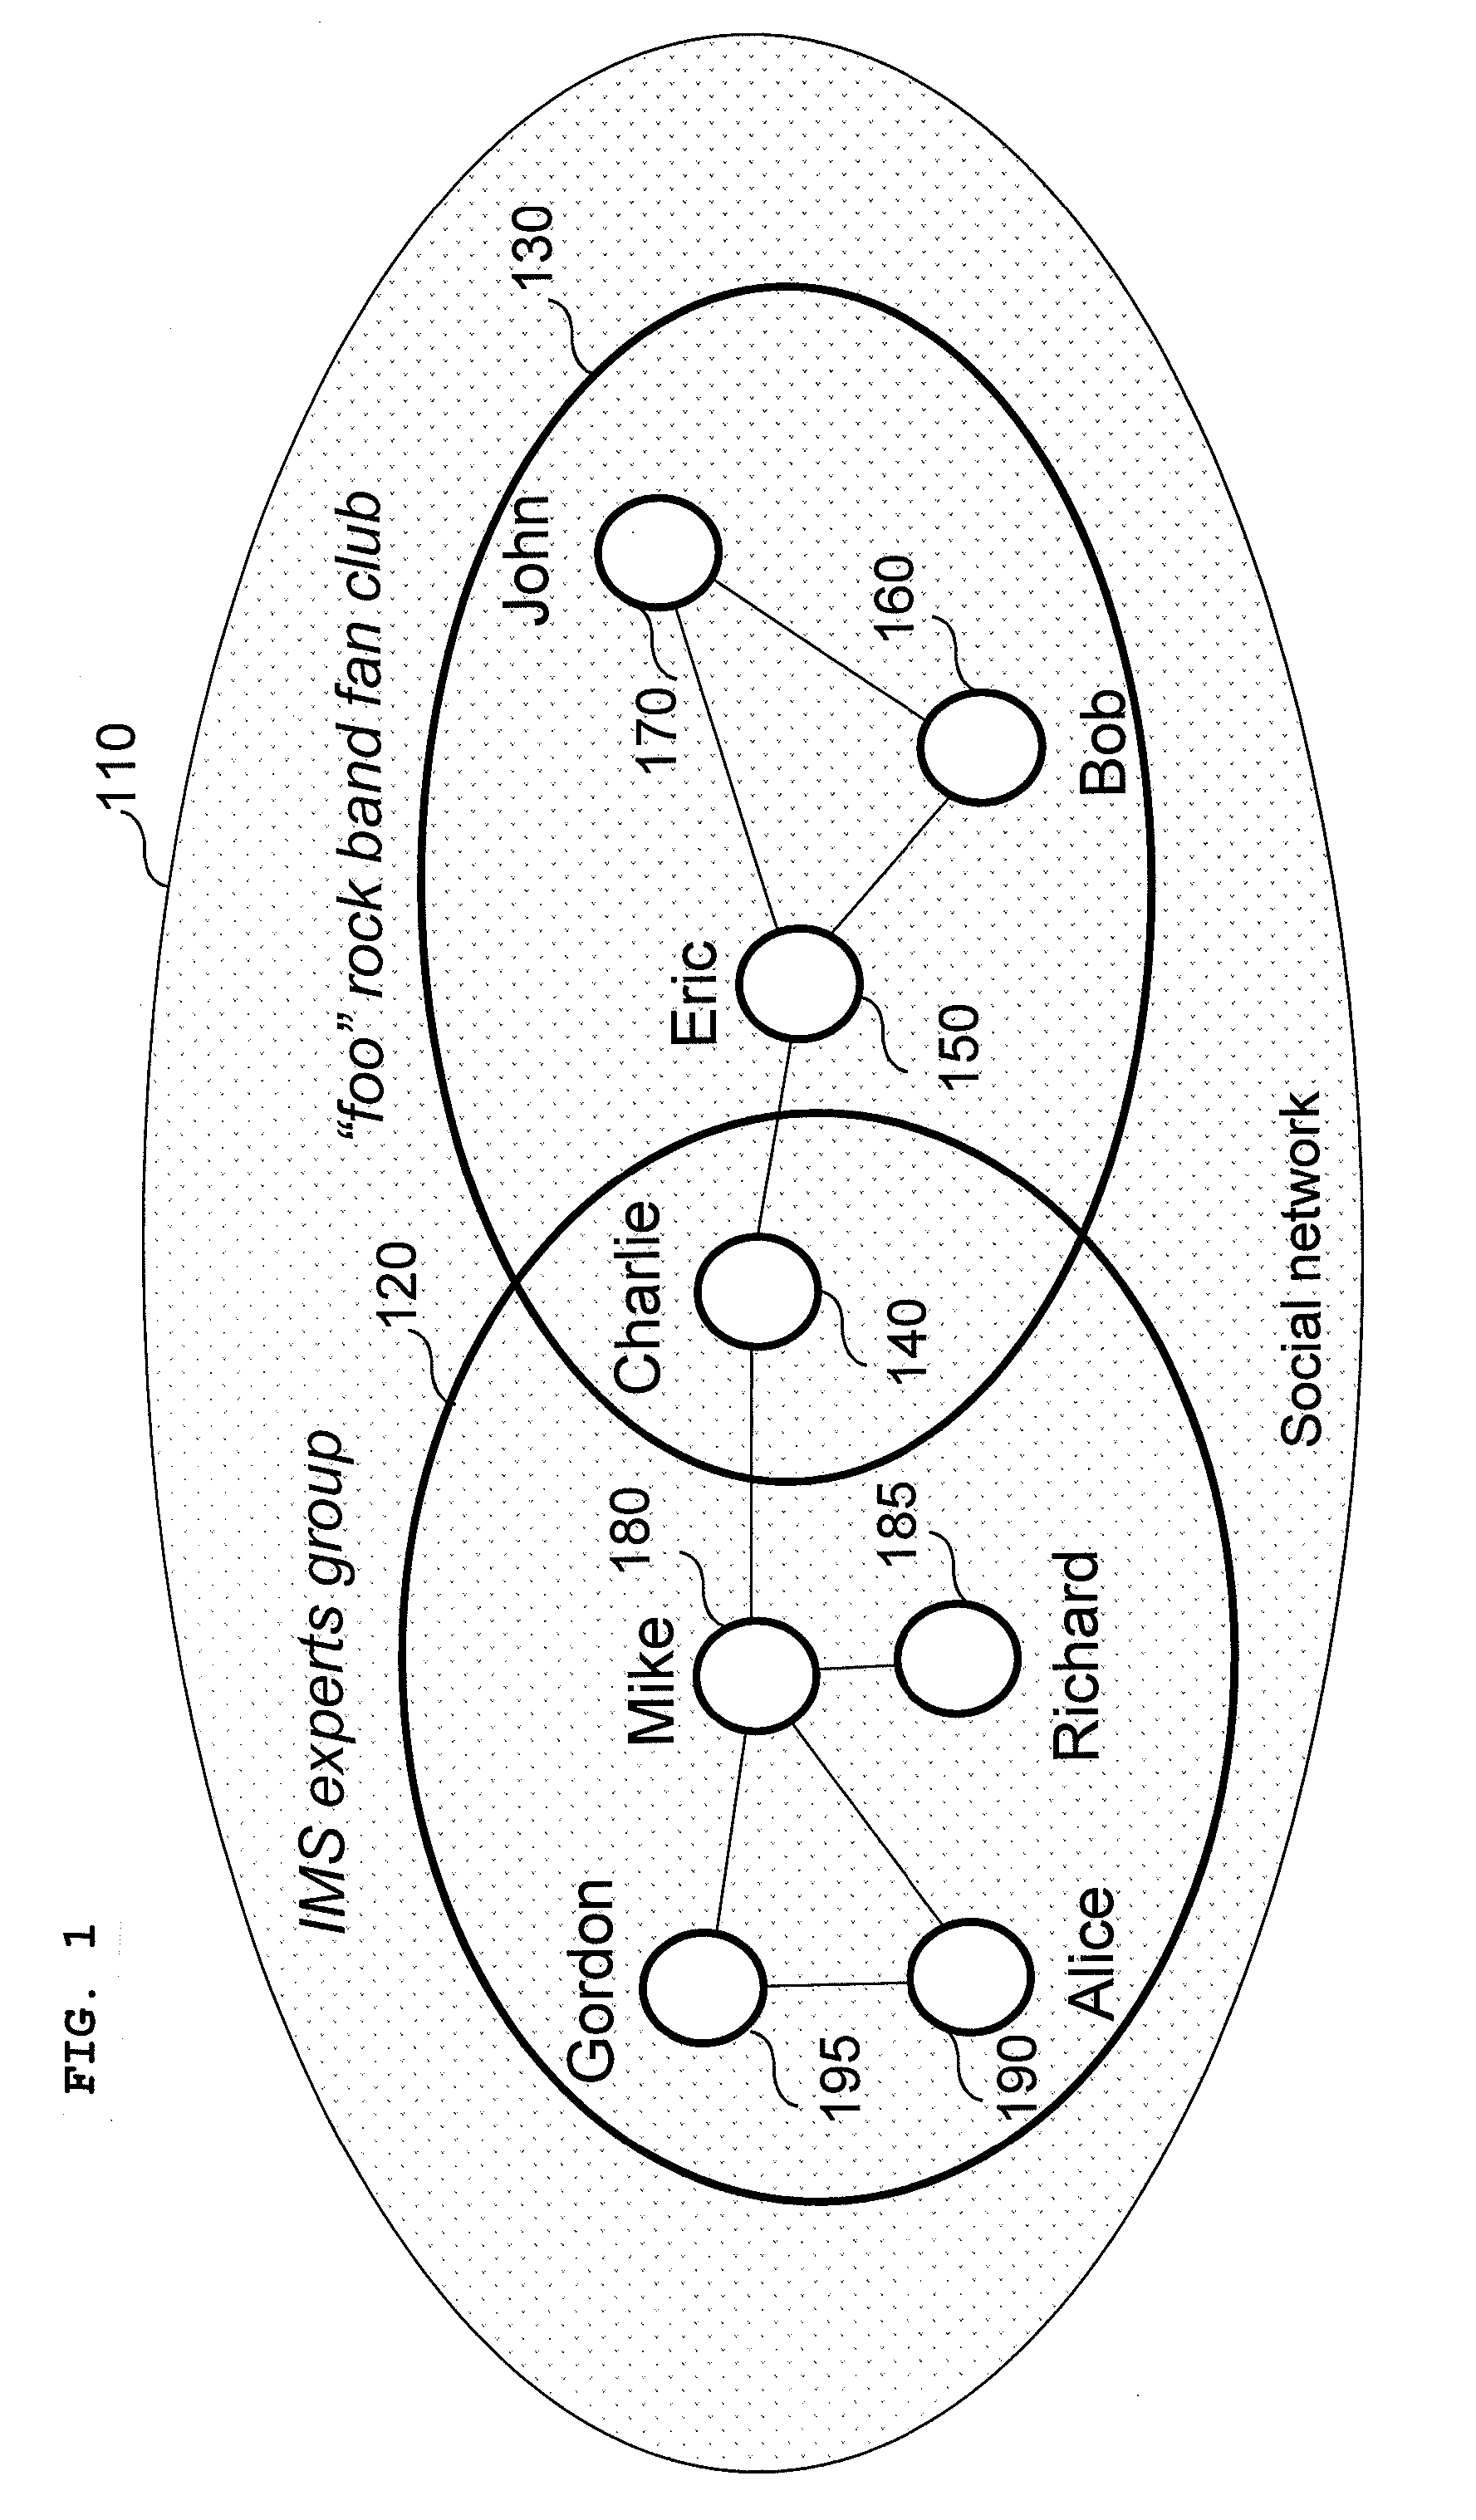 Method, System, and Devices for Network Sharing or Searching Of Resources